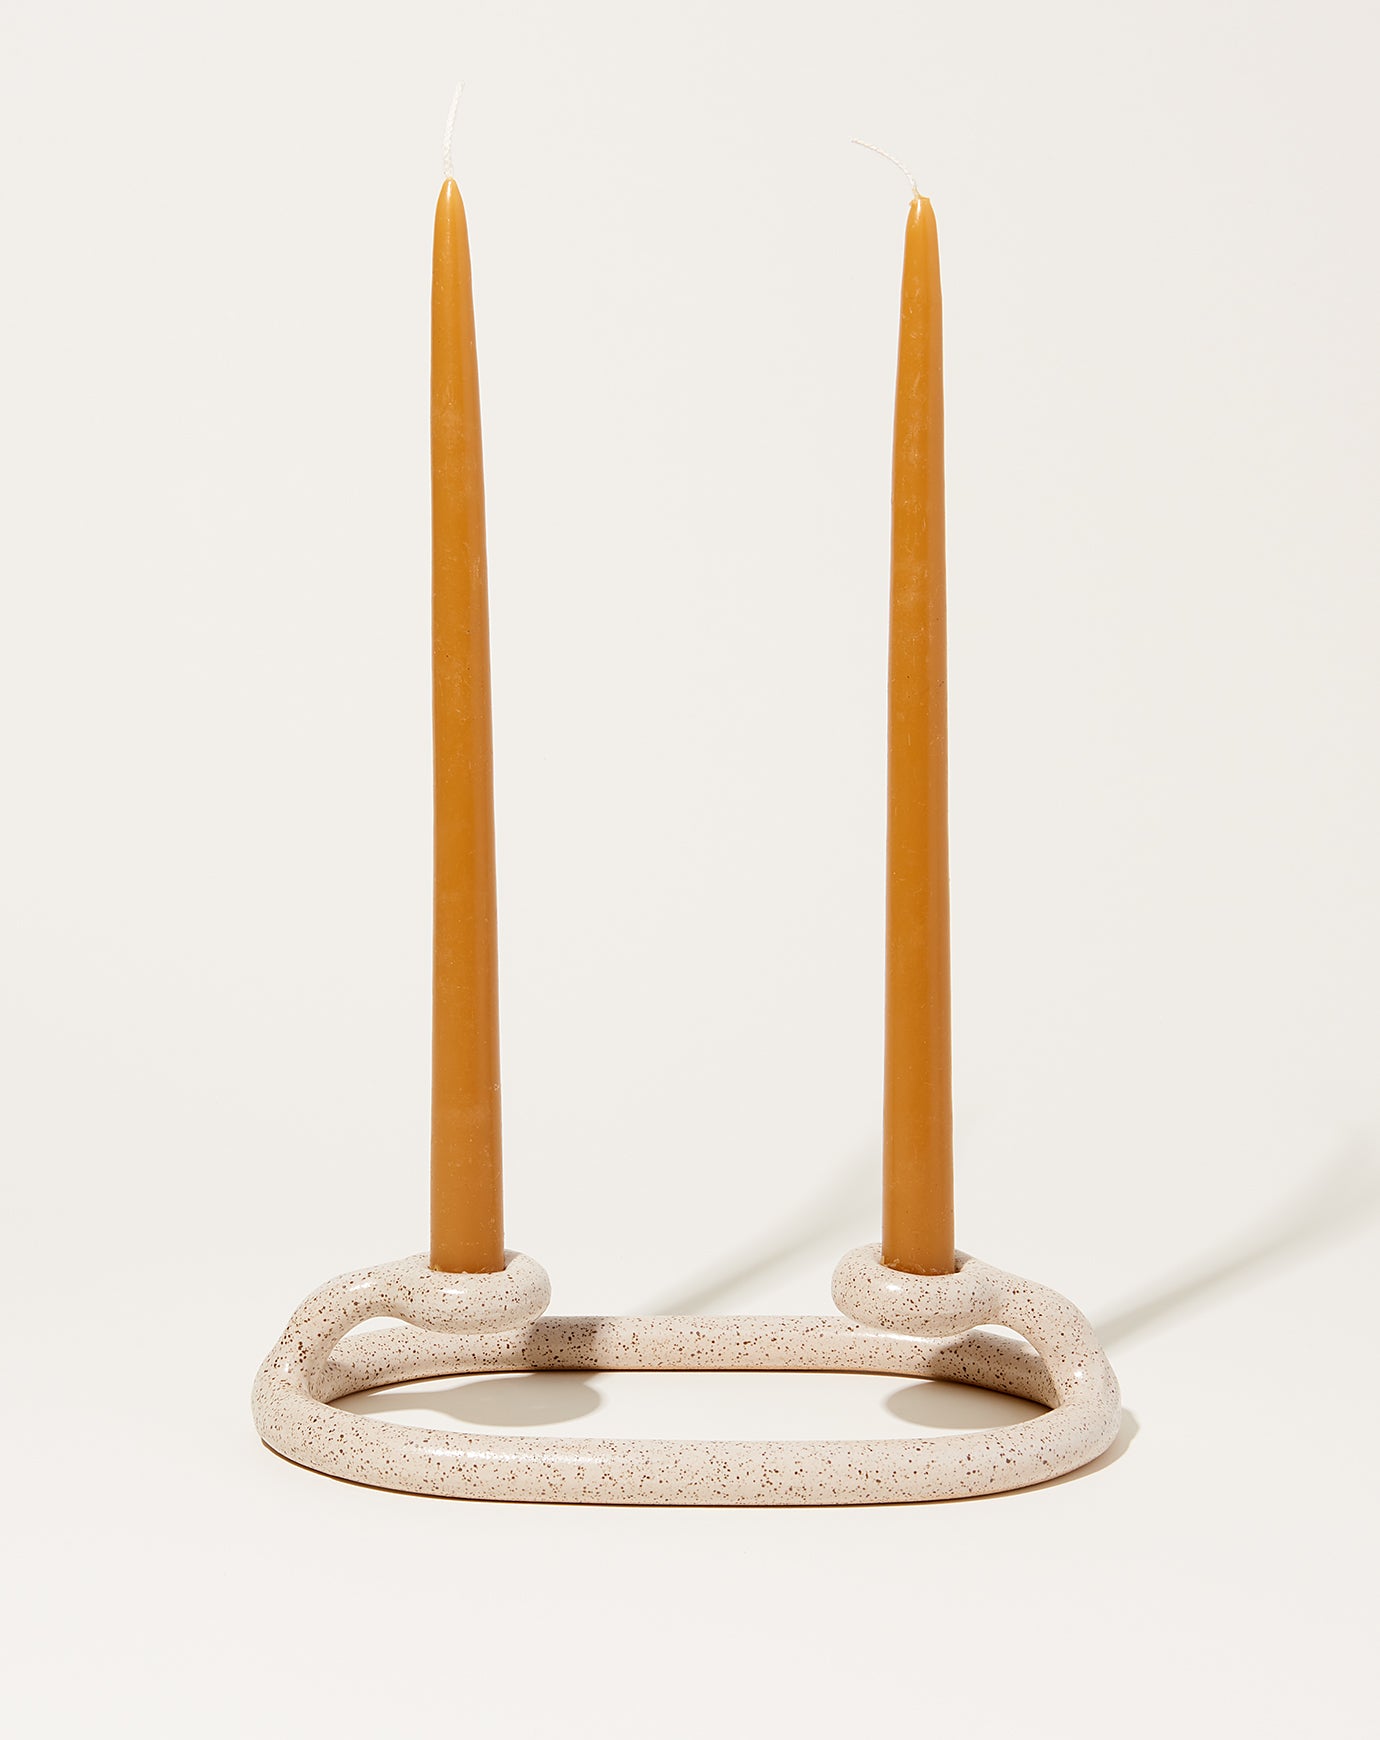 SIN Duo Candlestick in Speckled White